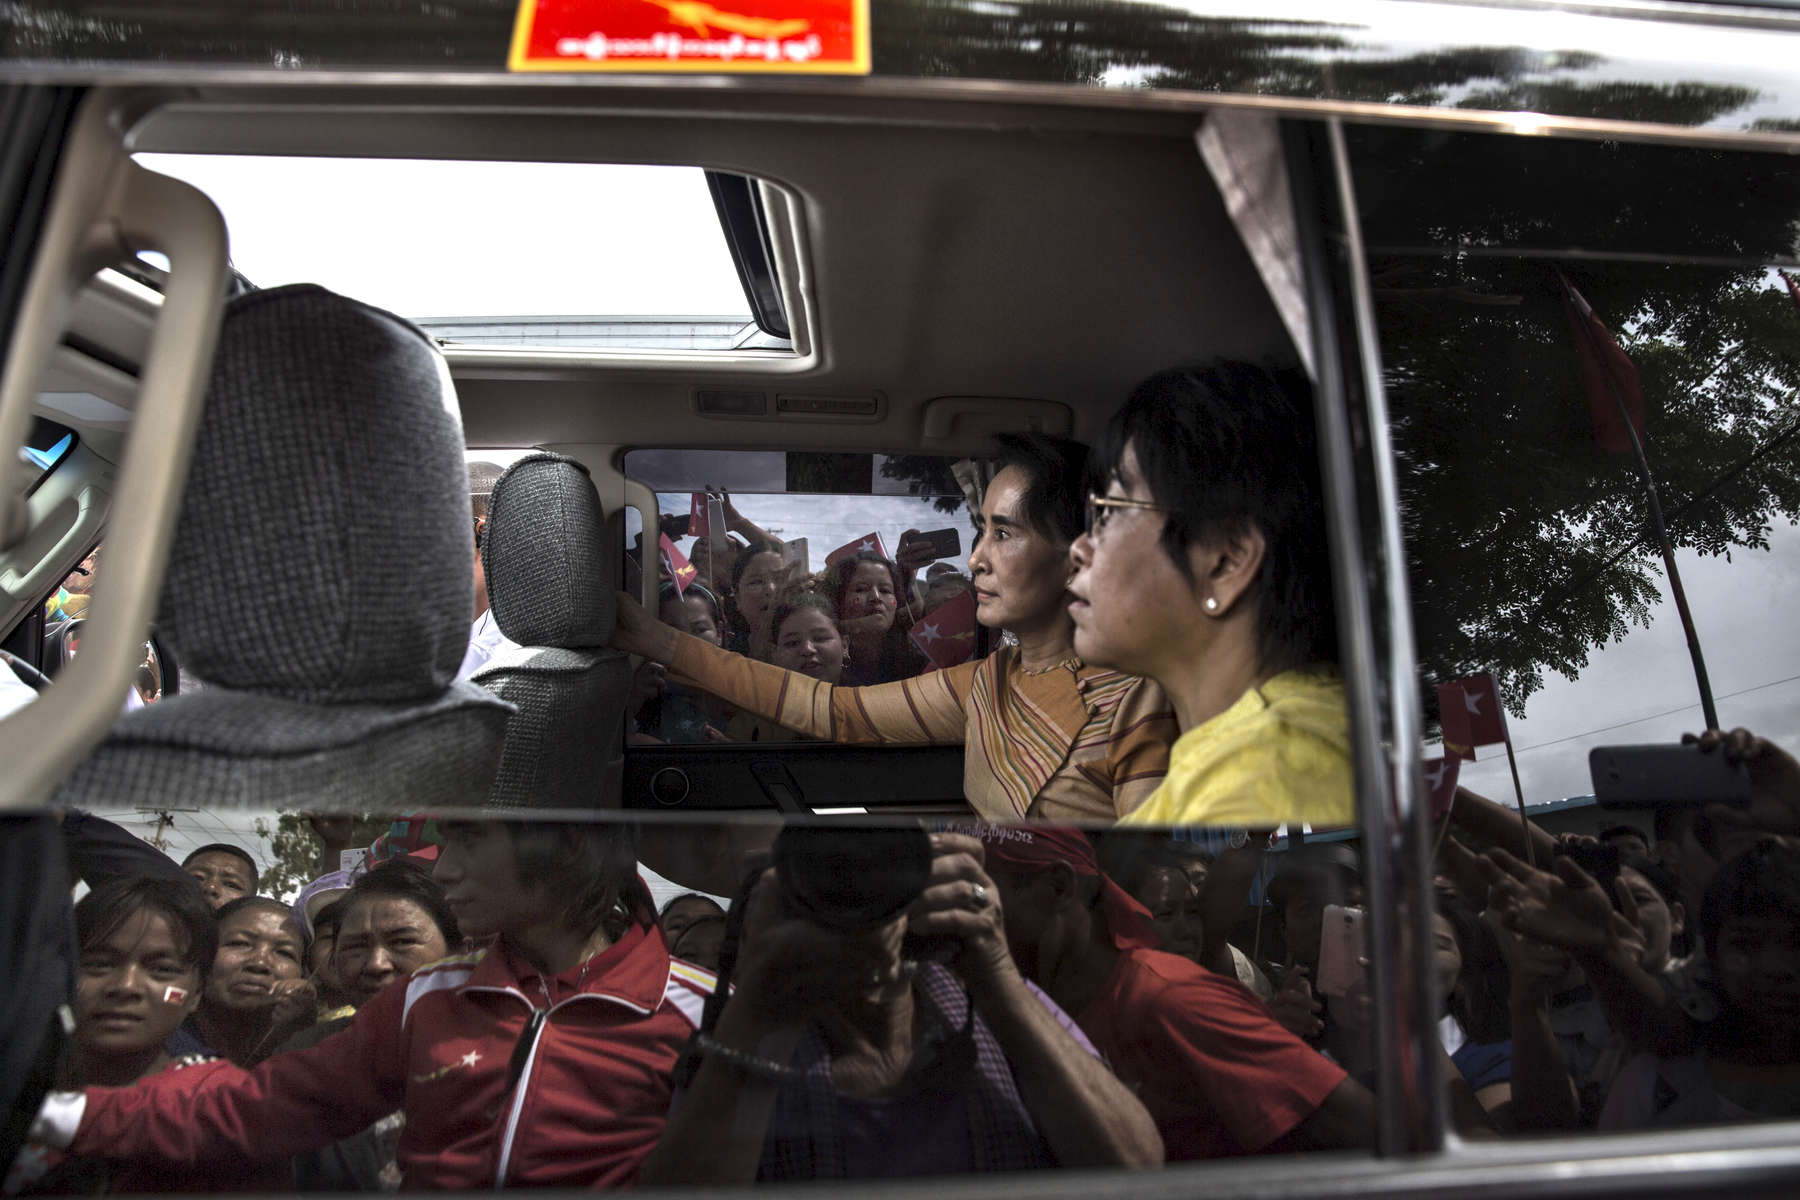 Seik Kaung:  Aung San Suu Kyi is seen in in her vehicle with her aide as supporters surround the car during an early election campaign visit to Shan state.Paula Bronstein for Der Spiegel / Getty Images Reportage